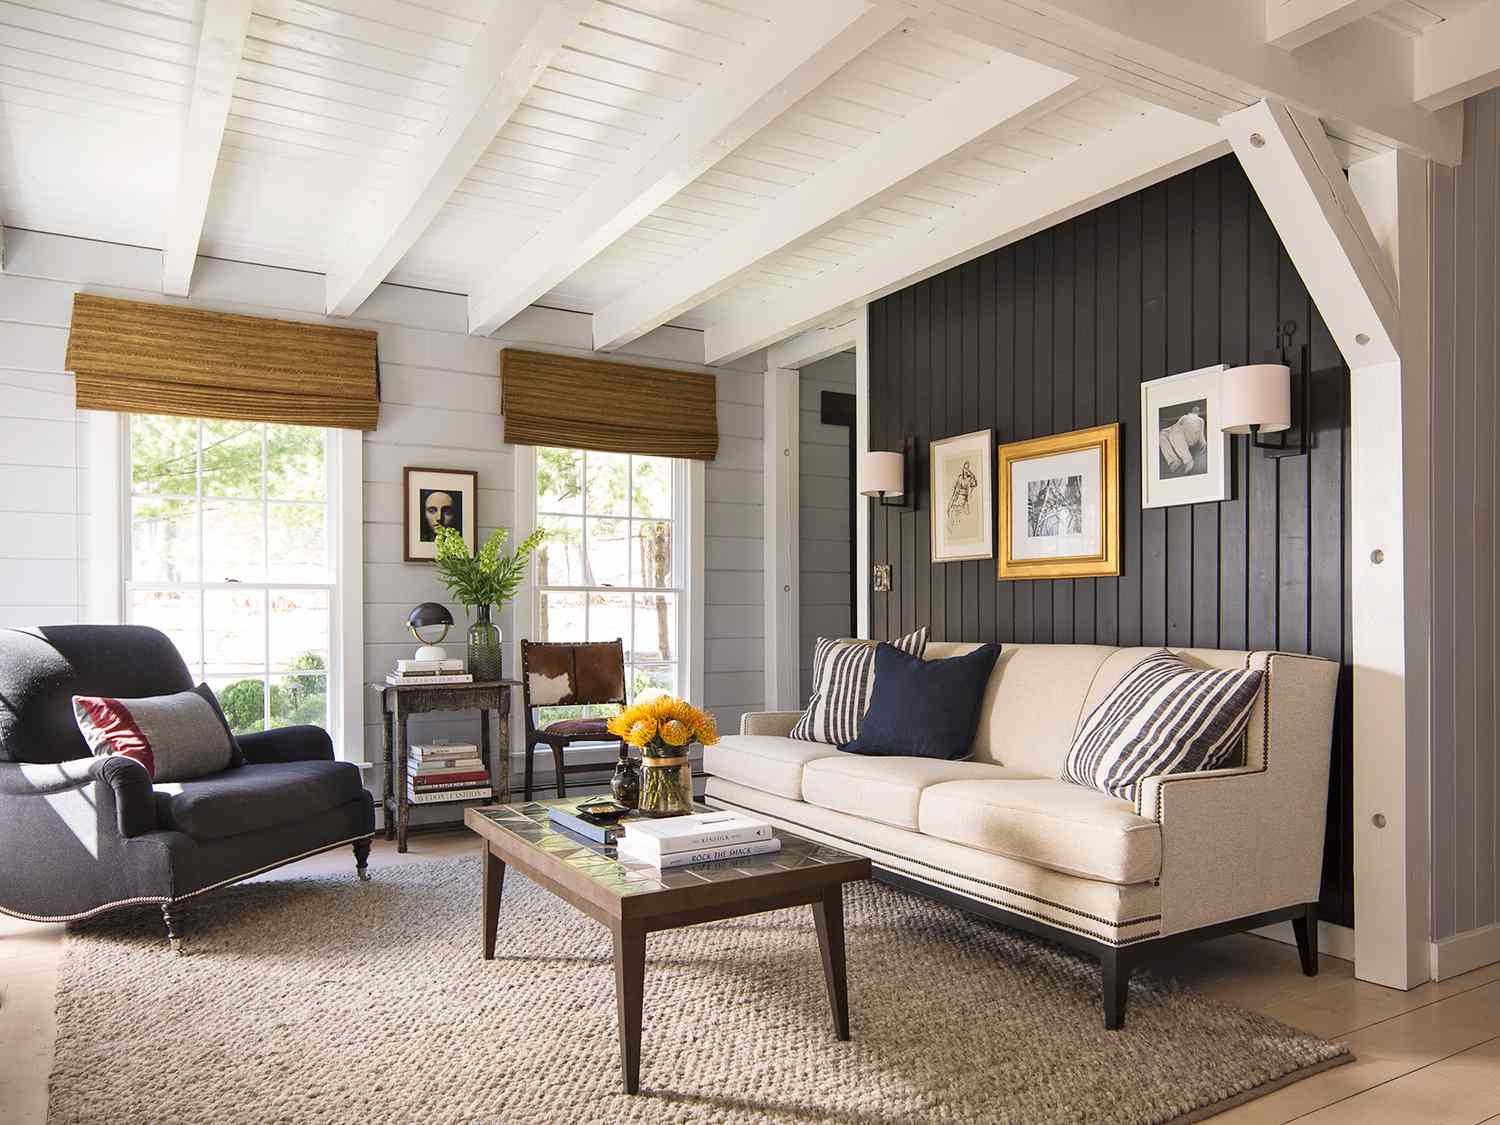 Farmhouse Living Room Furniture Ideas: Bringing Rustic Charm To Your Home